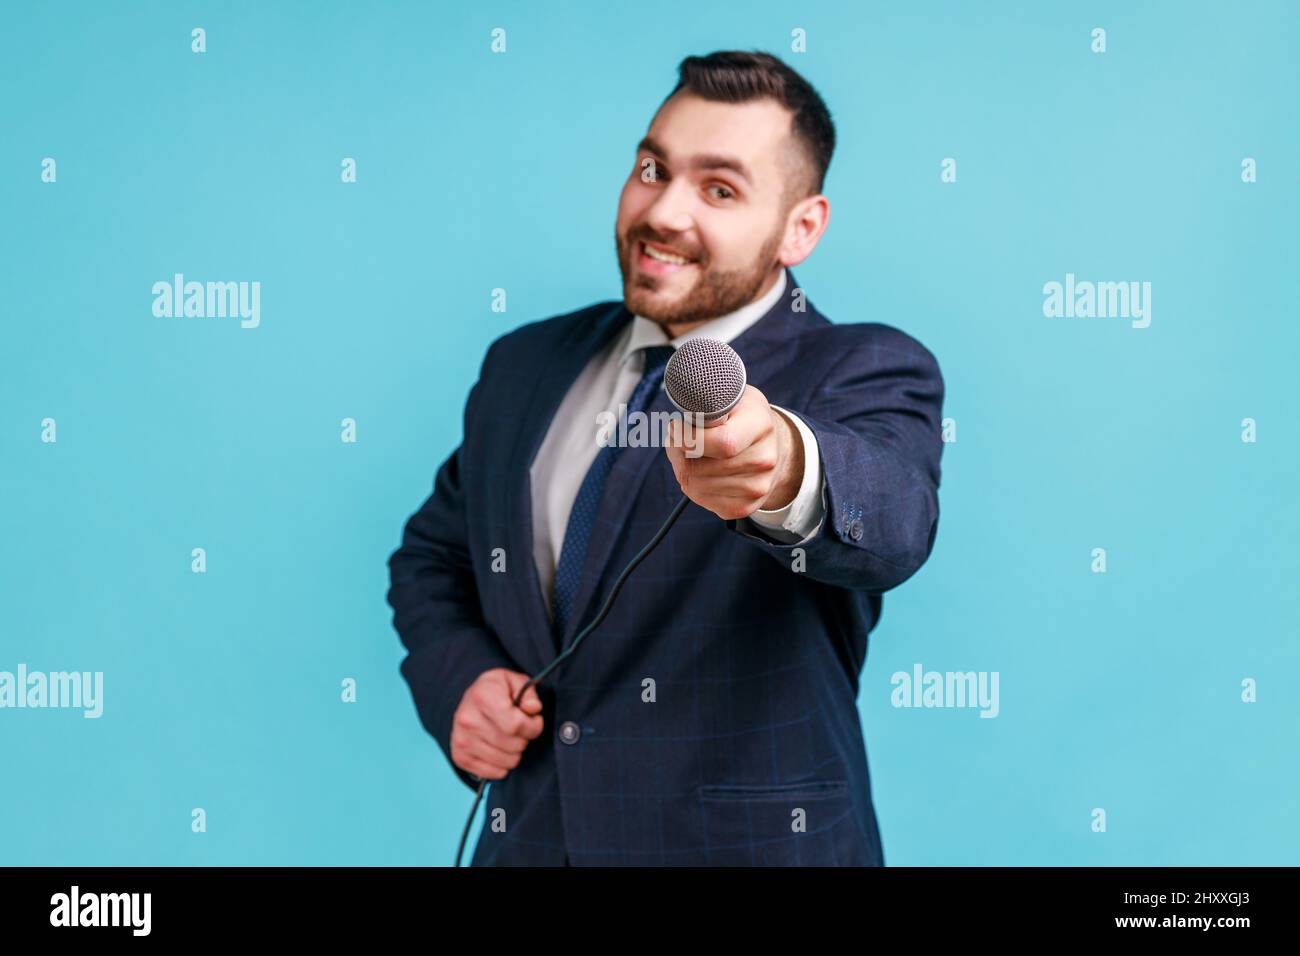 Smiling man journalist wearing official style suit holding microphone, making interview and asking opinion, looking at camera with smile. Indoor studio shot isolated on blue background. Stock Photo